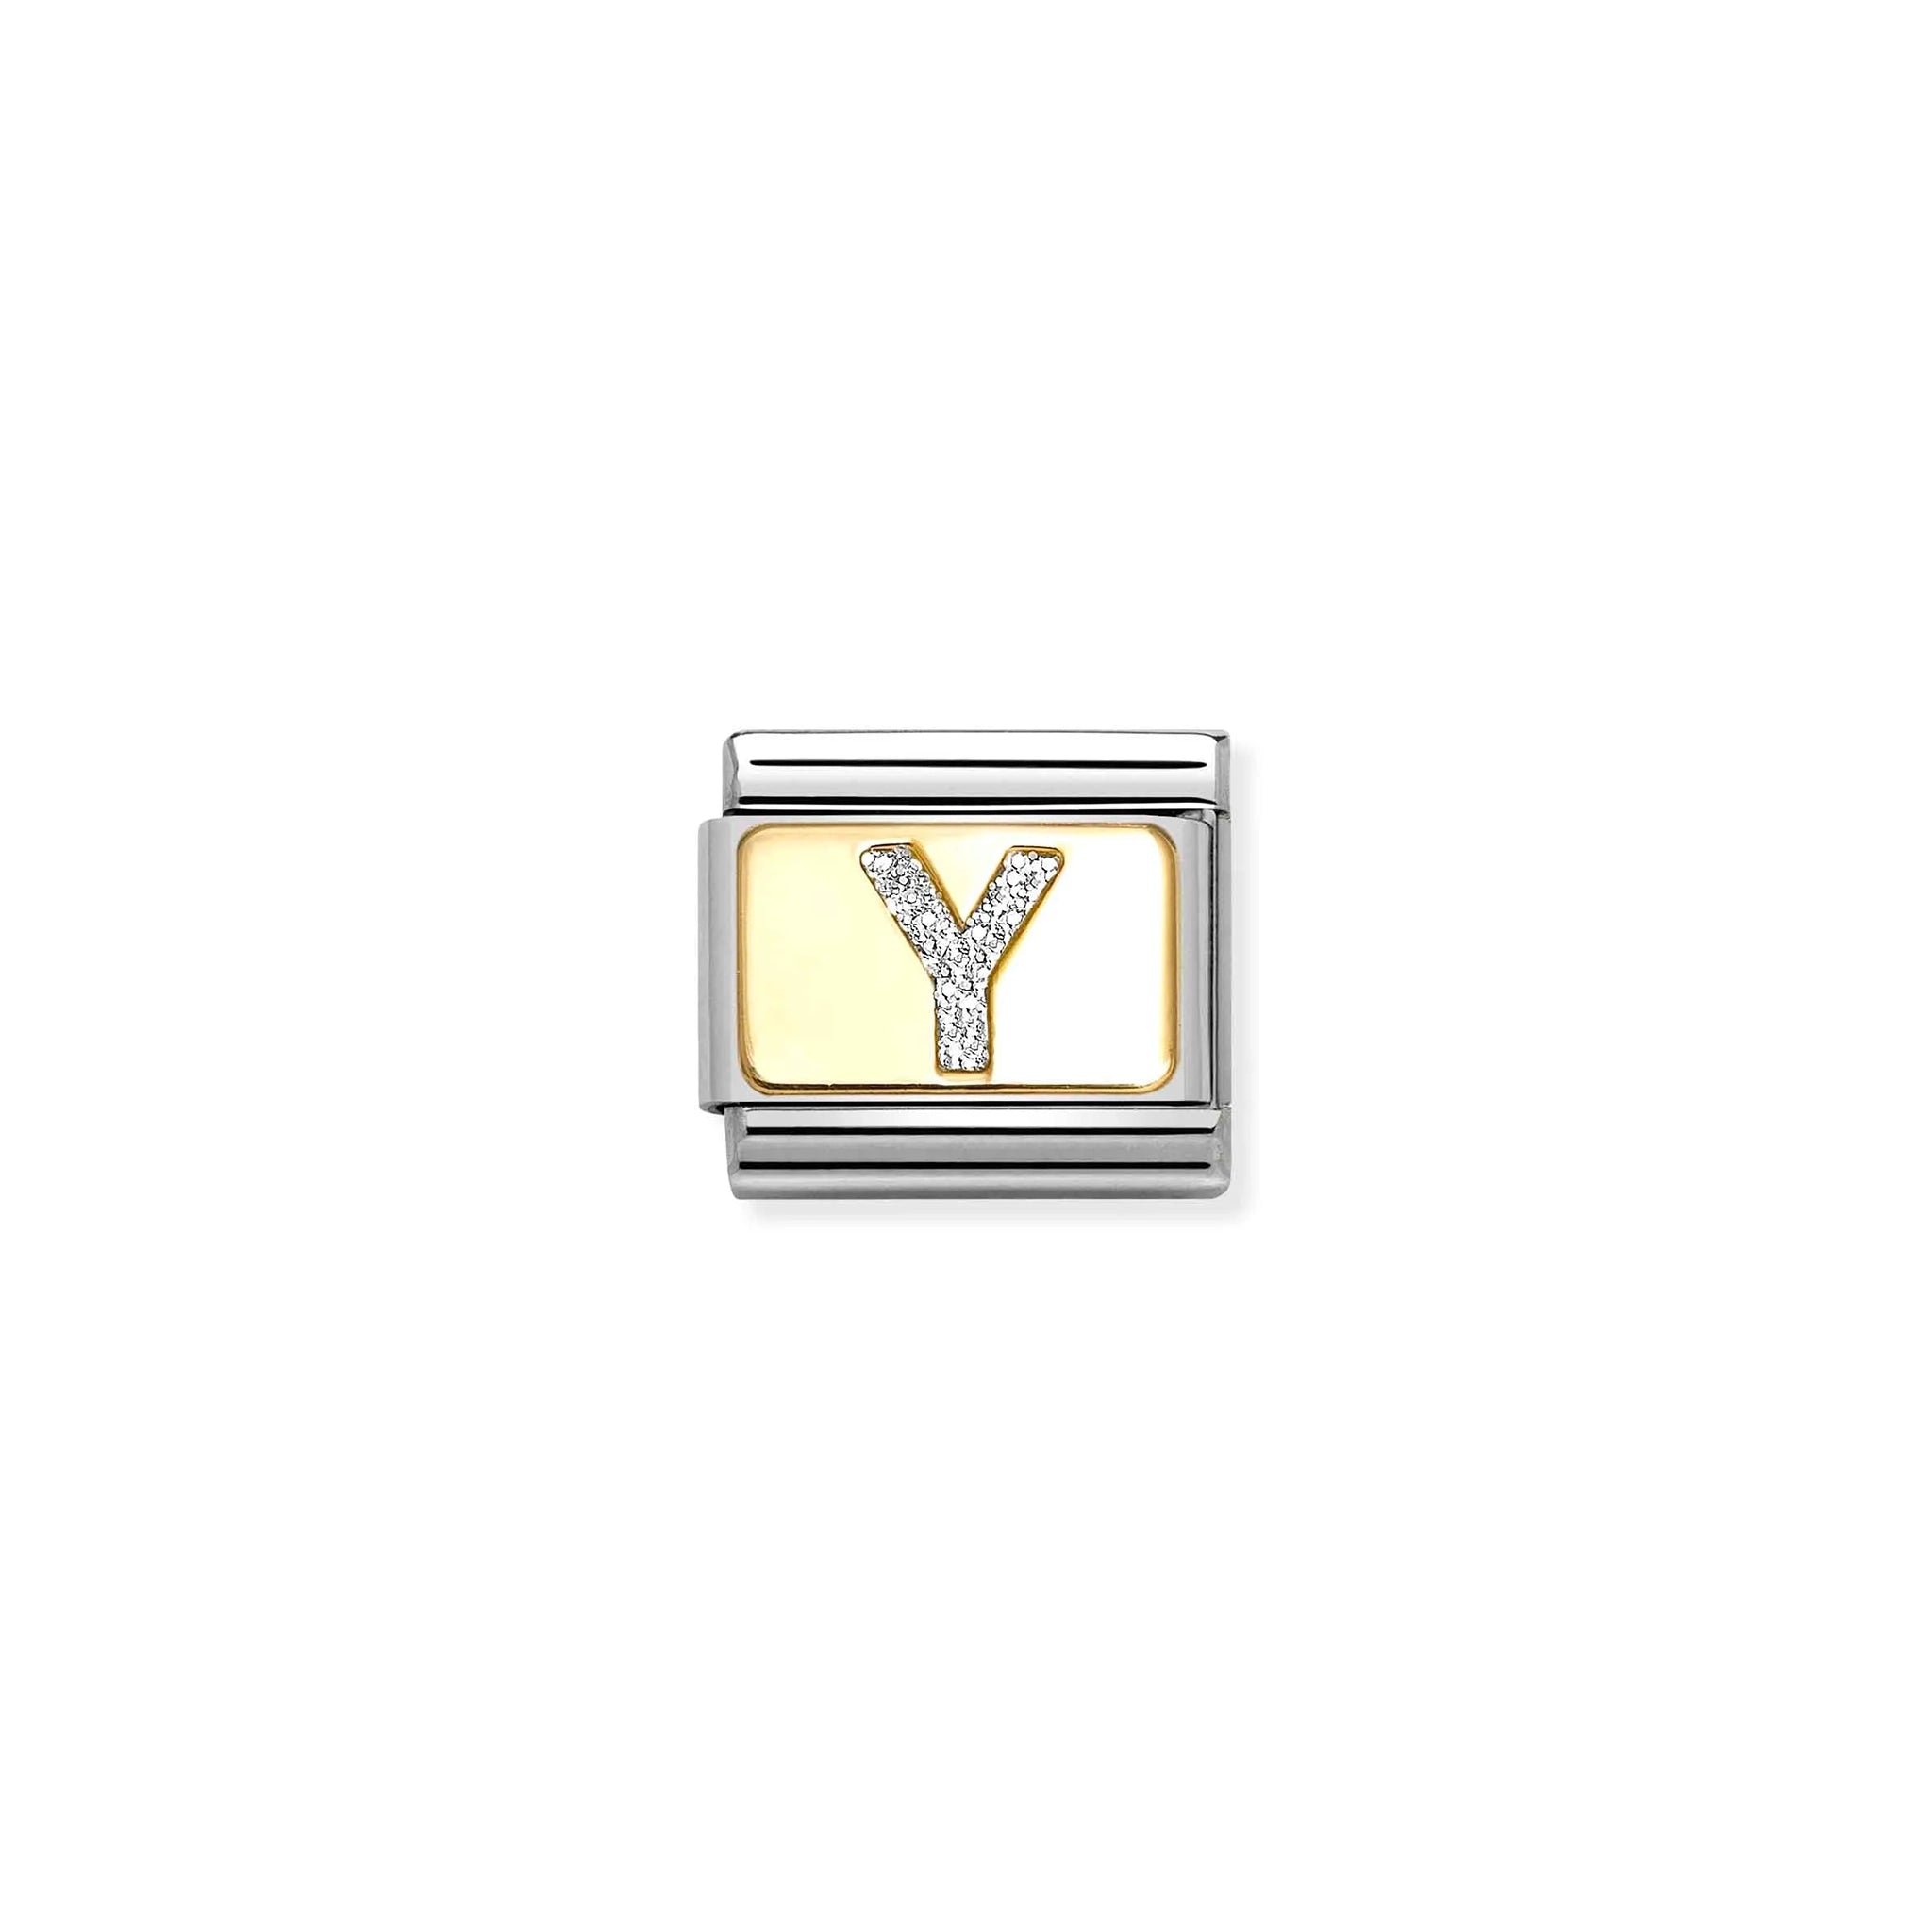 Nomination charm link featuring a gold plaque with a silver glitter letter Y